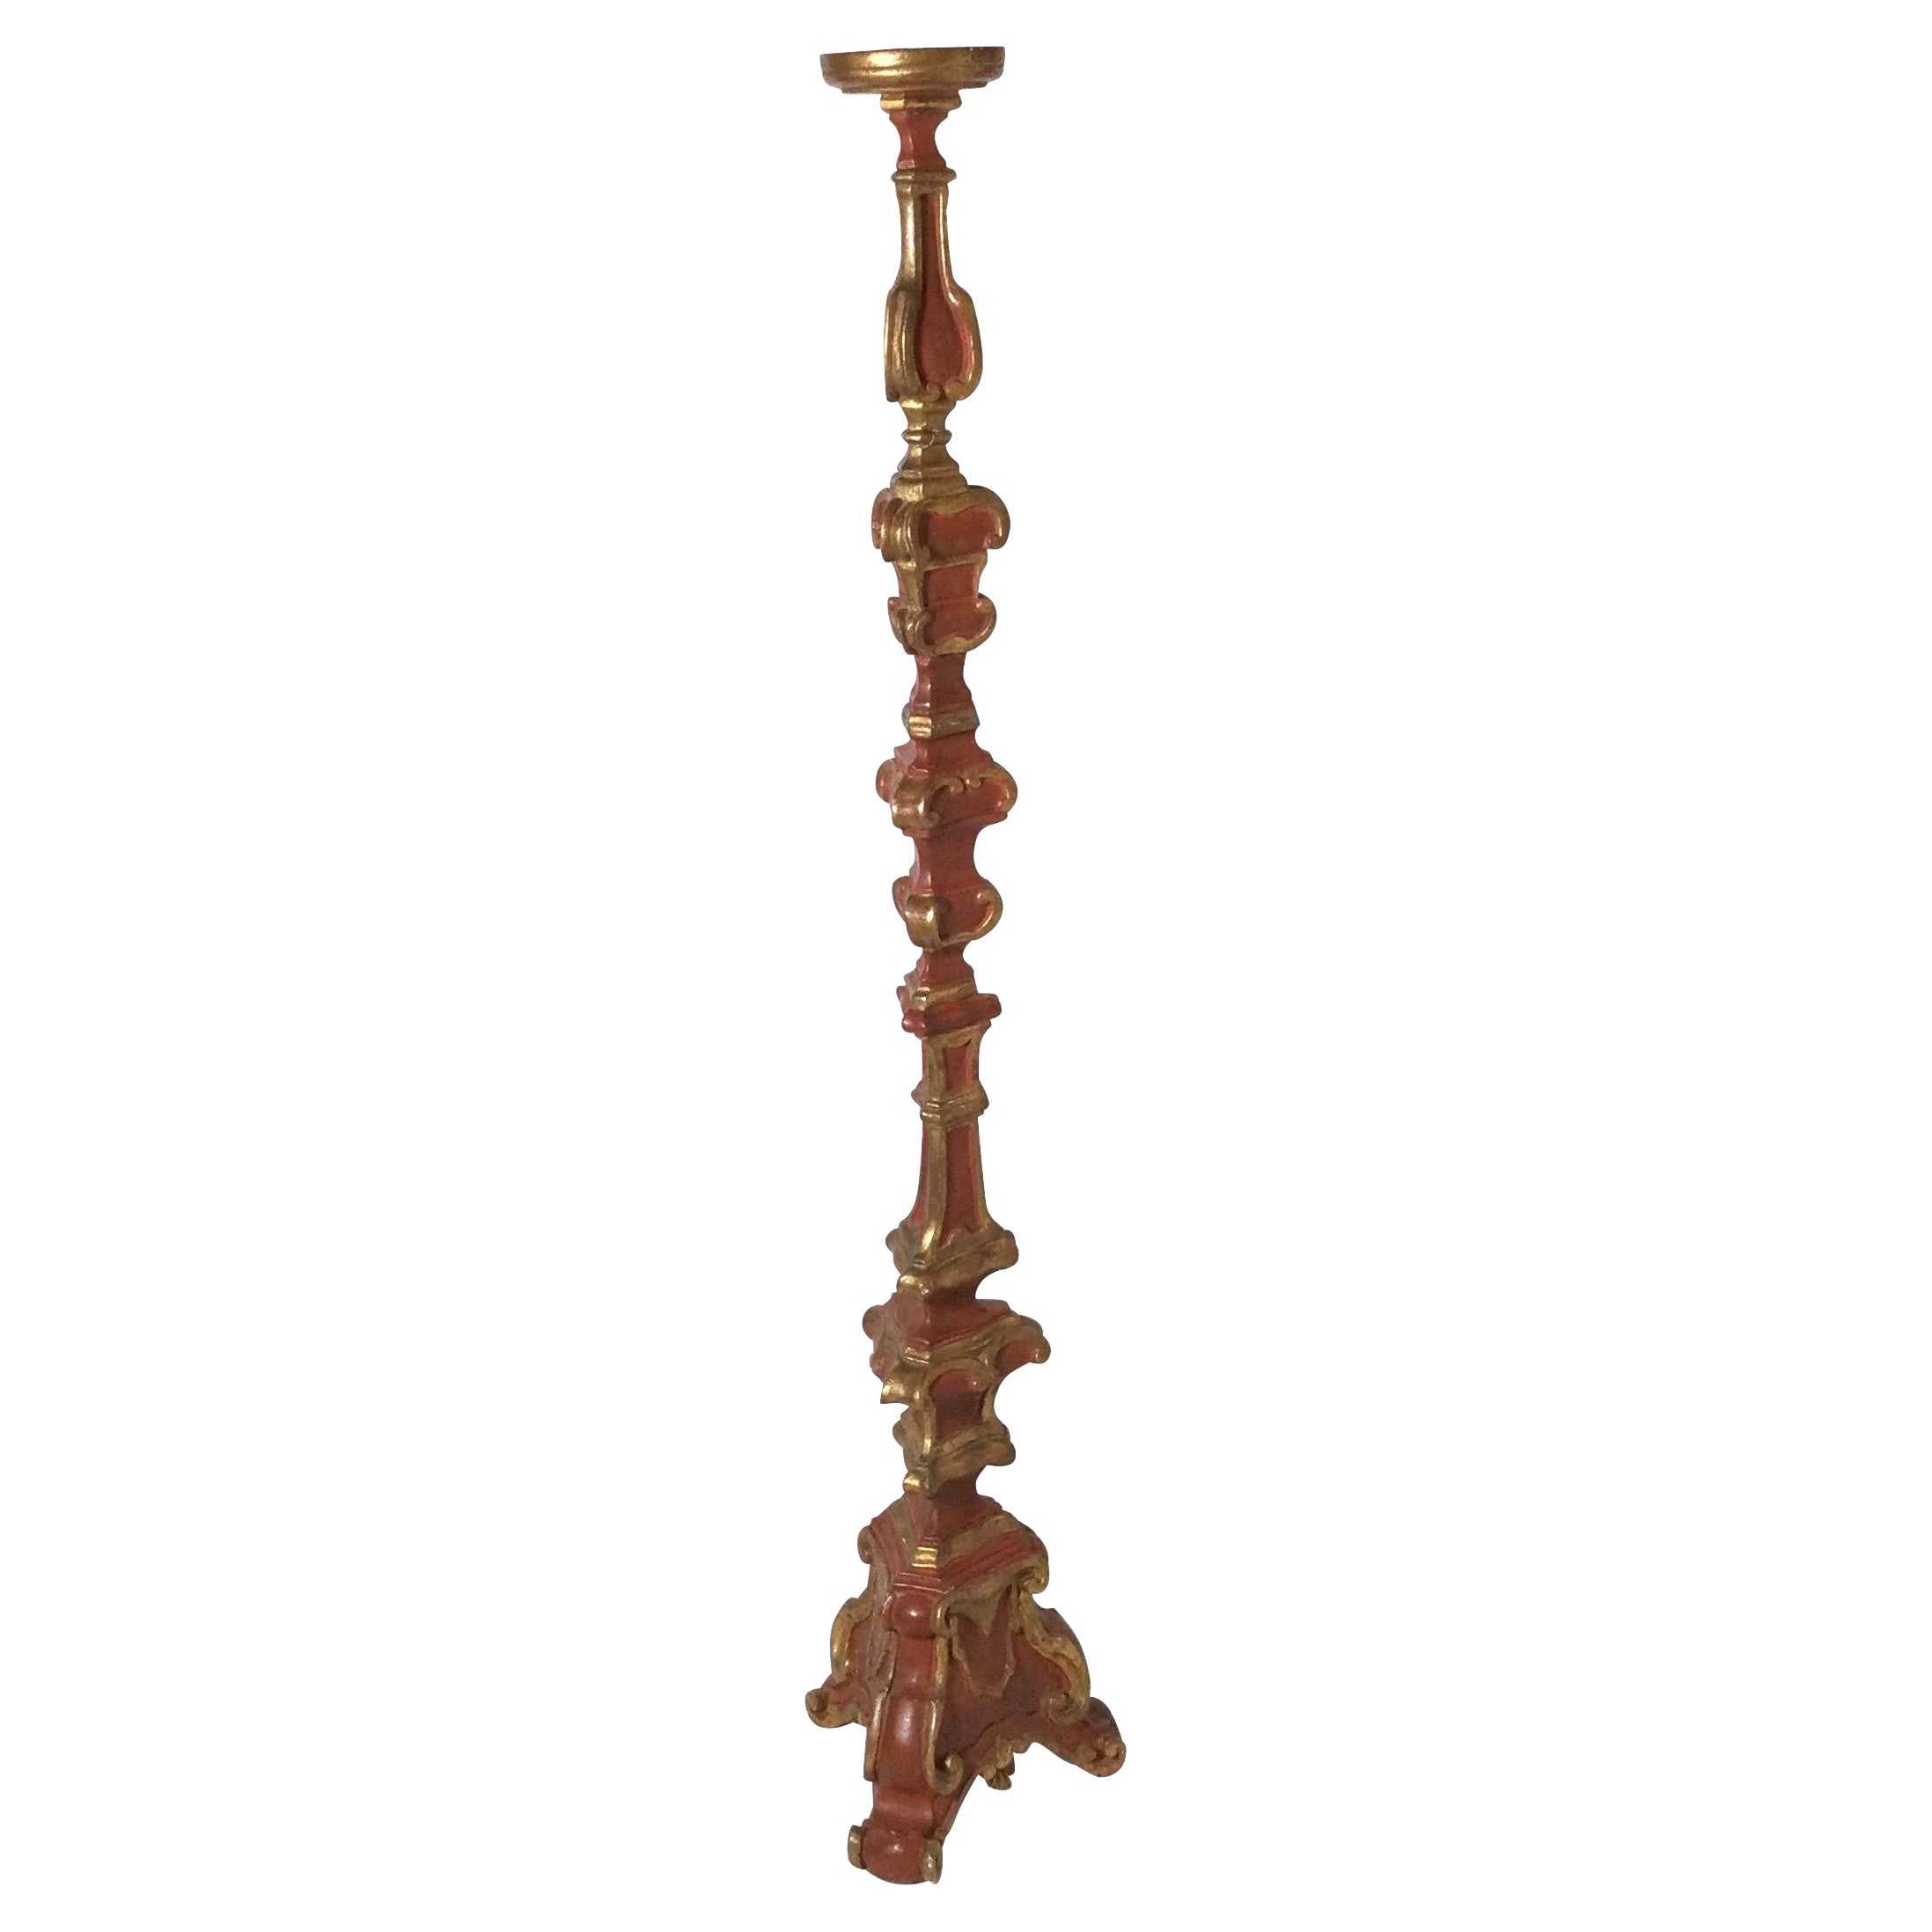 Venetian Painted and Parcel Gilt Tall Candle Holder